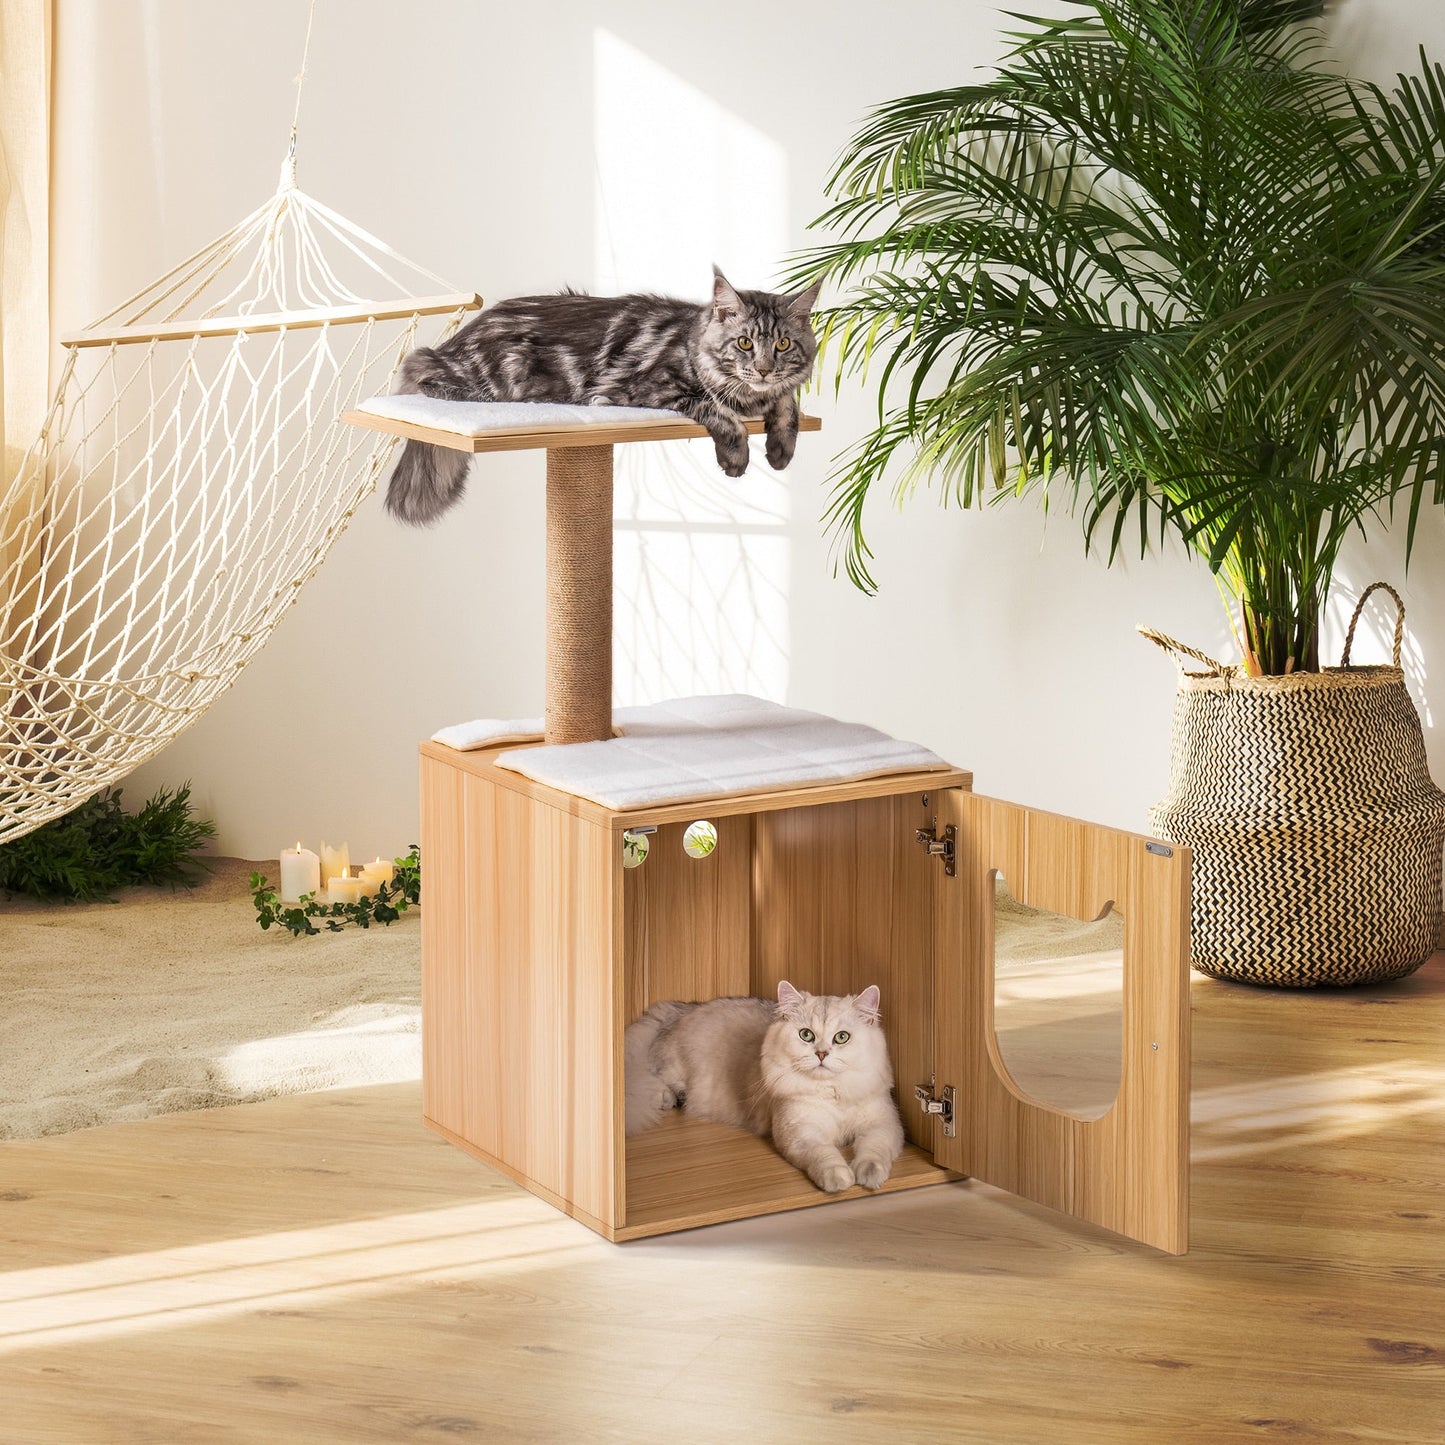 Natural colored solid wood texture of cat tree with enclosed space for sleeping or to put litter box